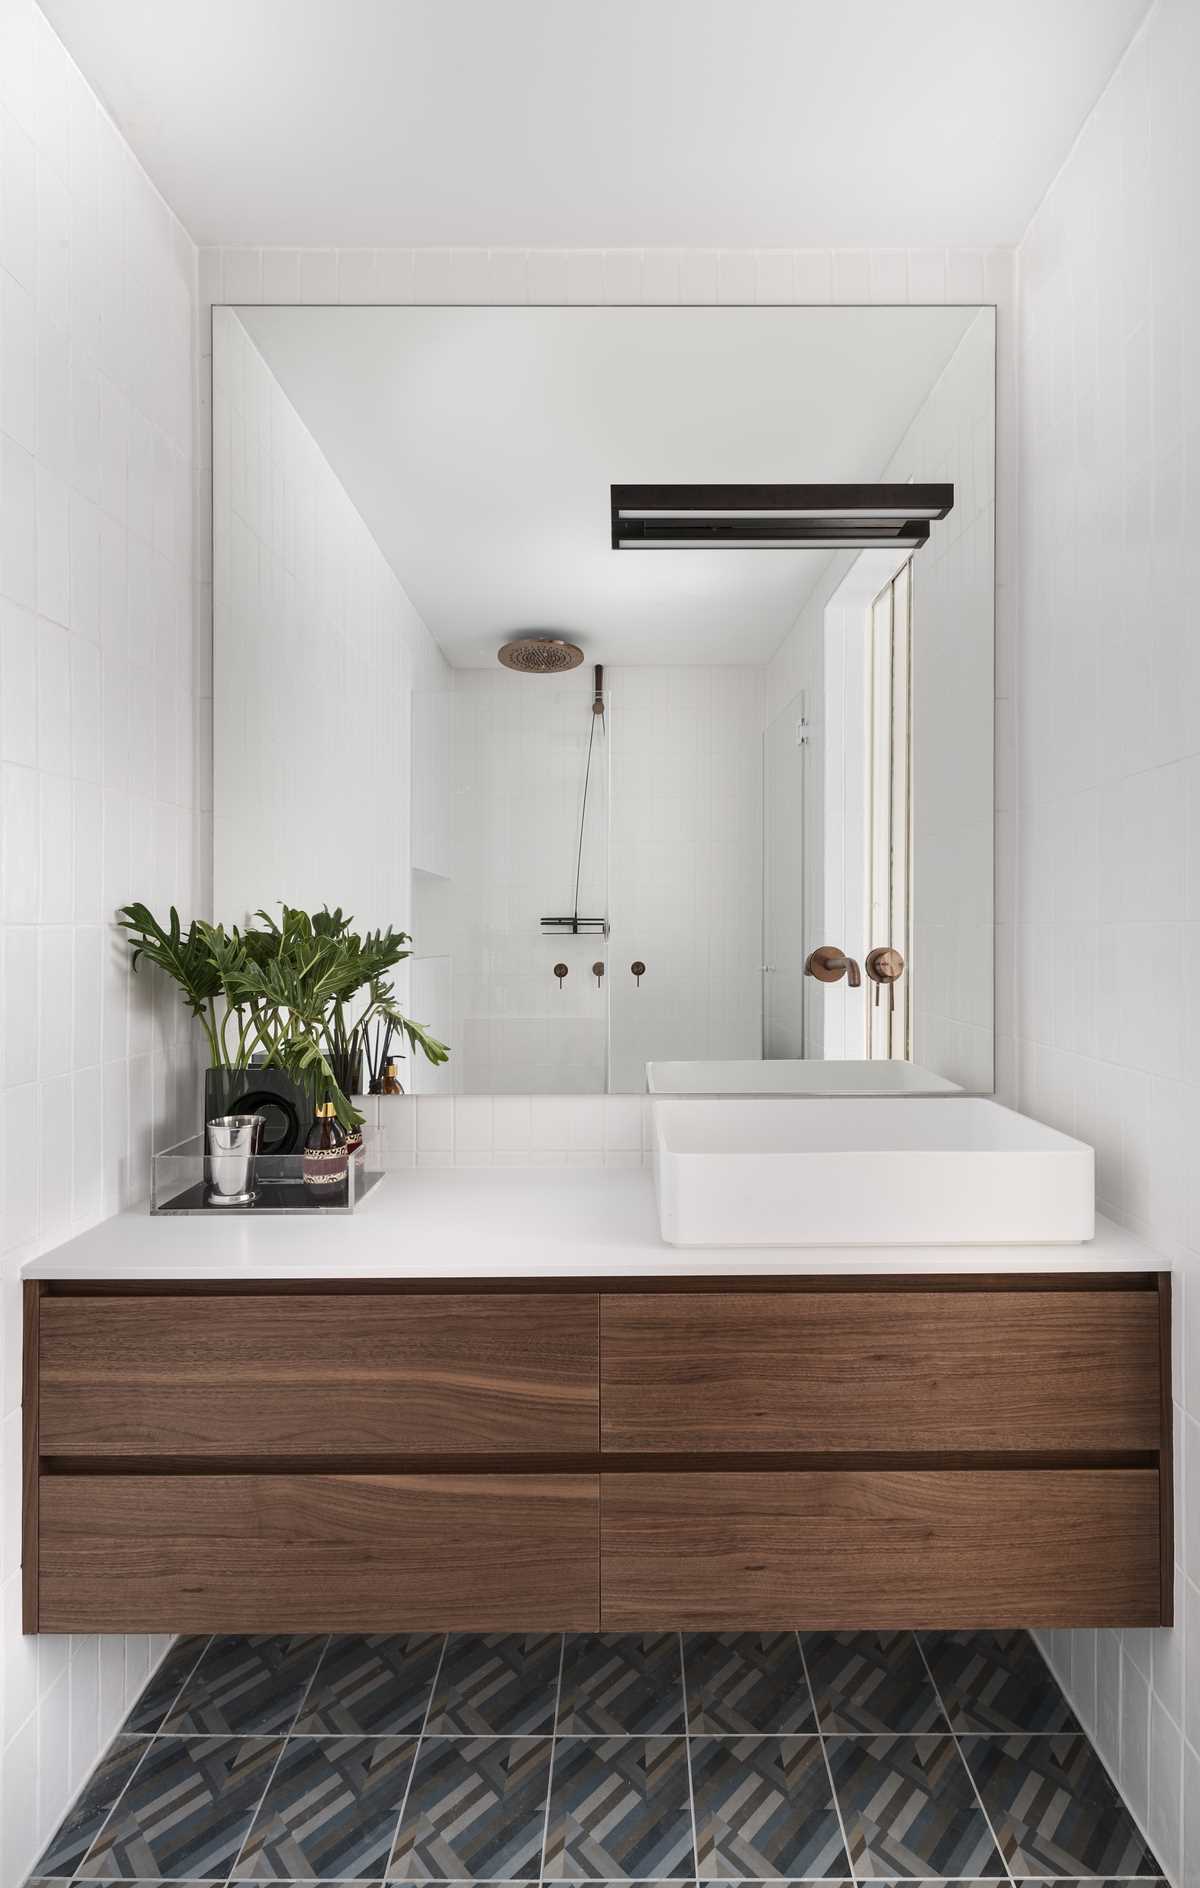 This modern bathroom has a full-width floating wood vanity, tiled walls, and a patterned floor.